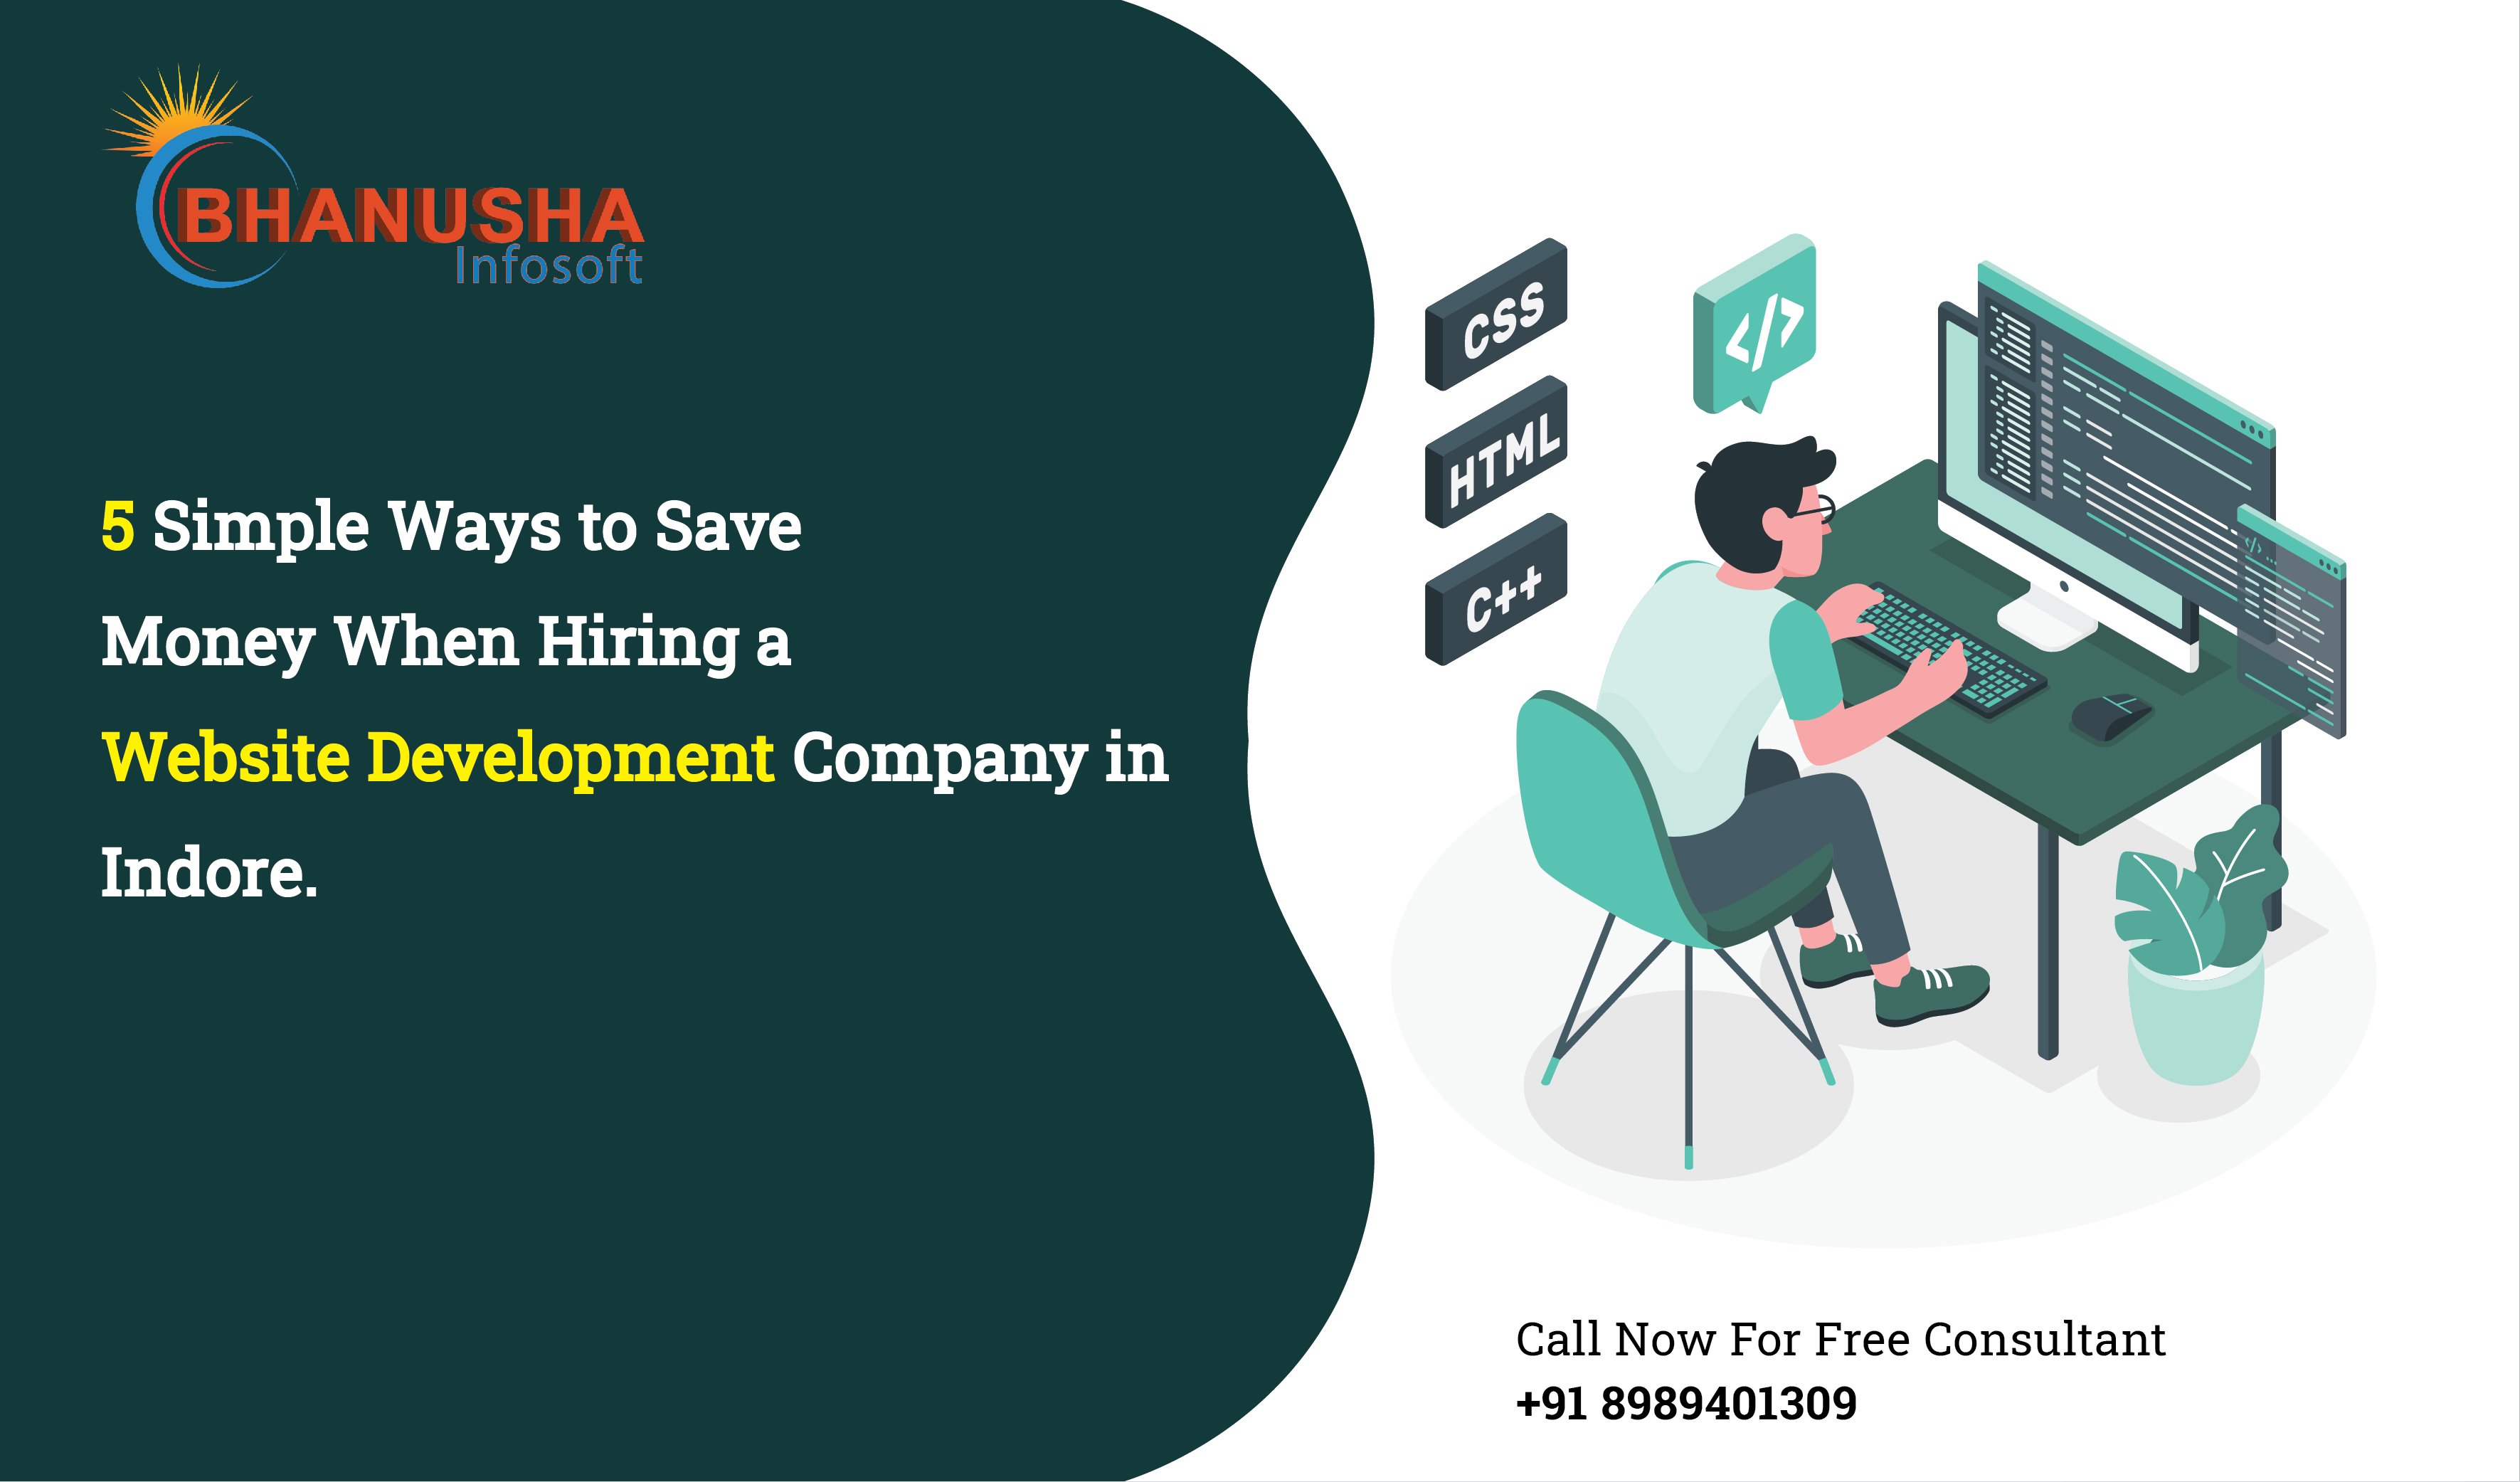 5 Simple Ways to Save Money When Hiring a Website Development Company in Indore